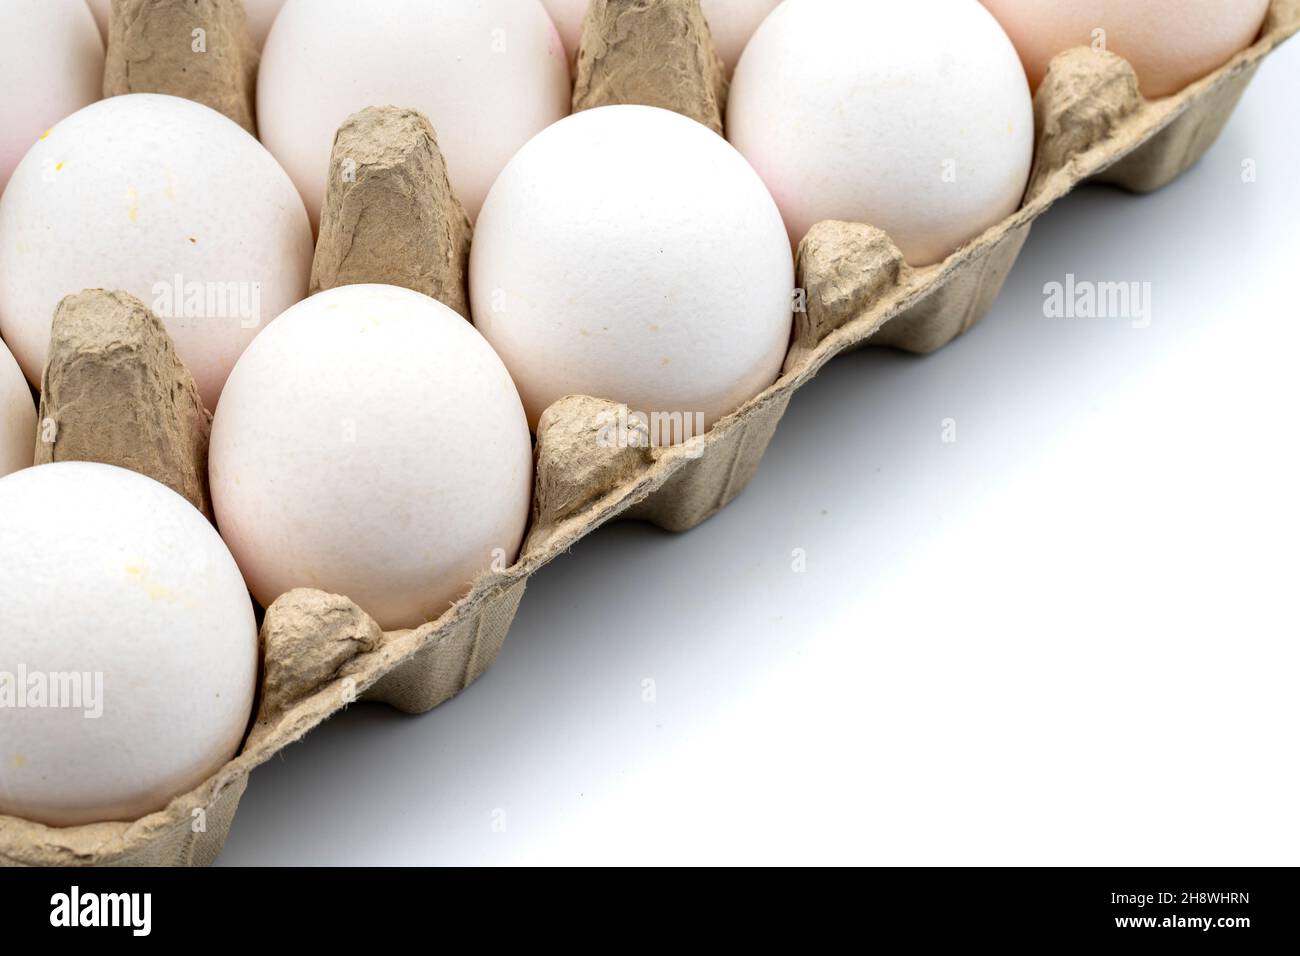 Eggs in a carton on a white background. horizontal view. close up Stock Photo